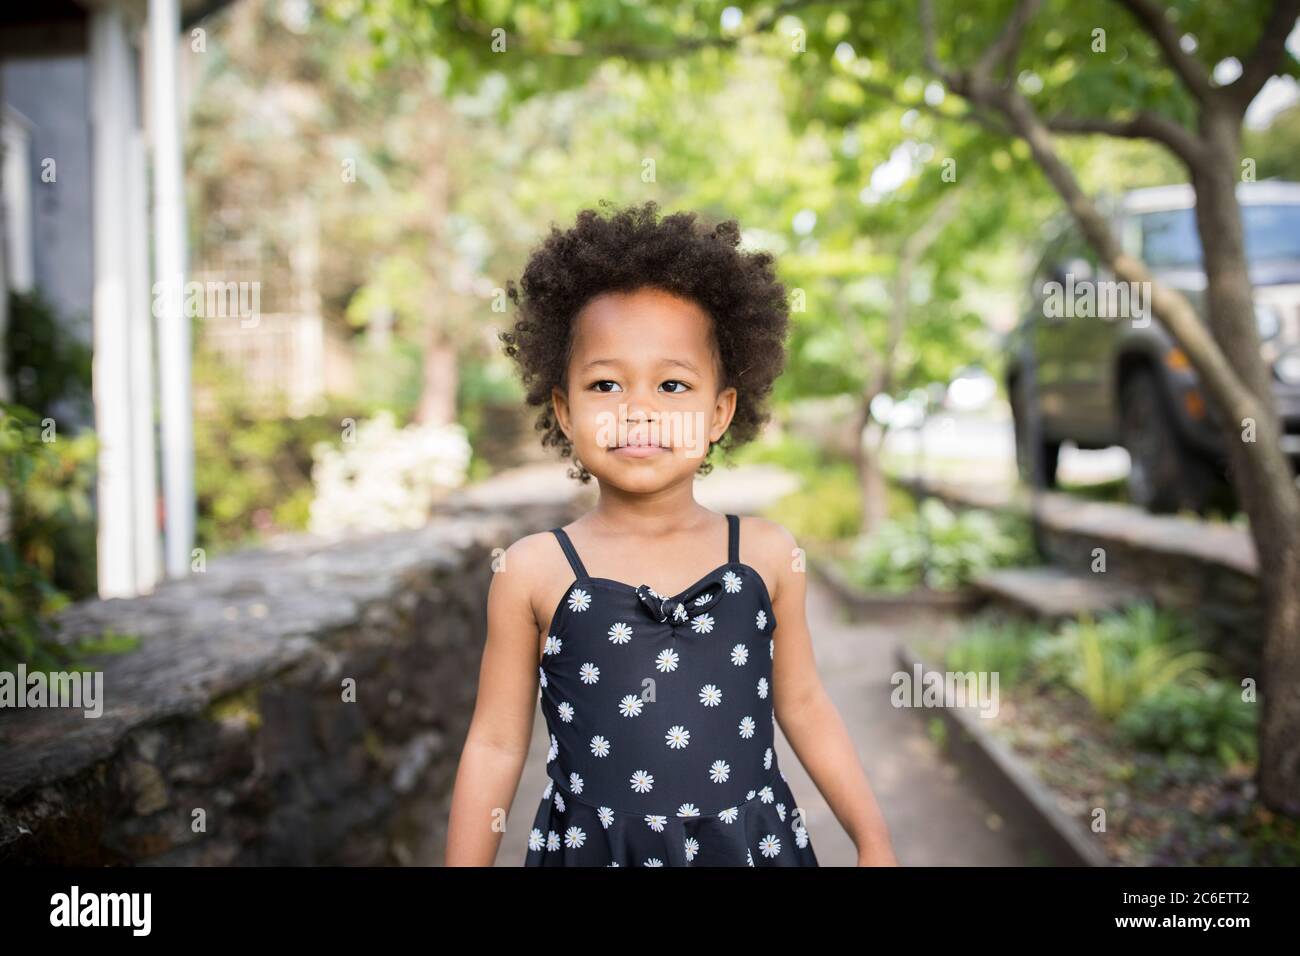 Portrait of a young beautiful African American girl standing with confidence in urban environment. Stock Photo